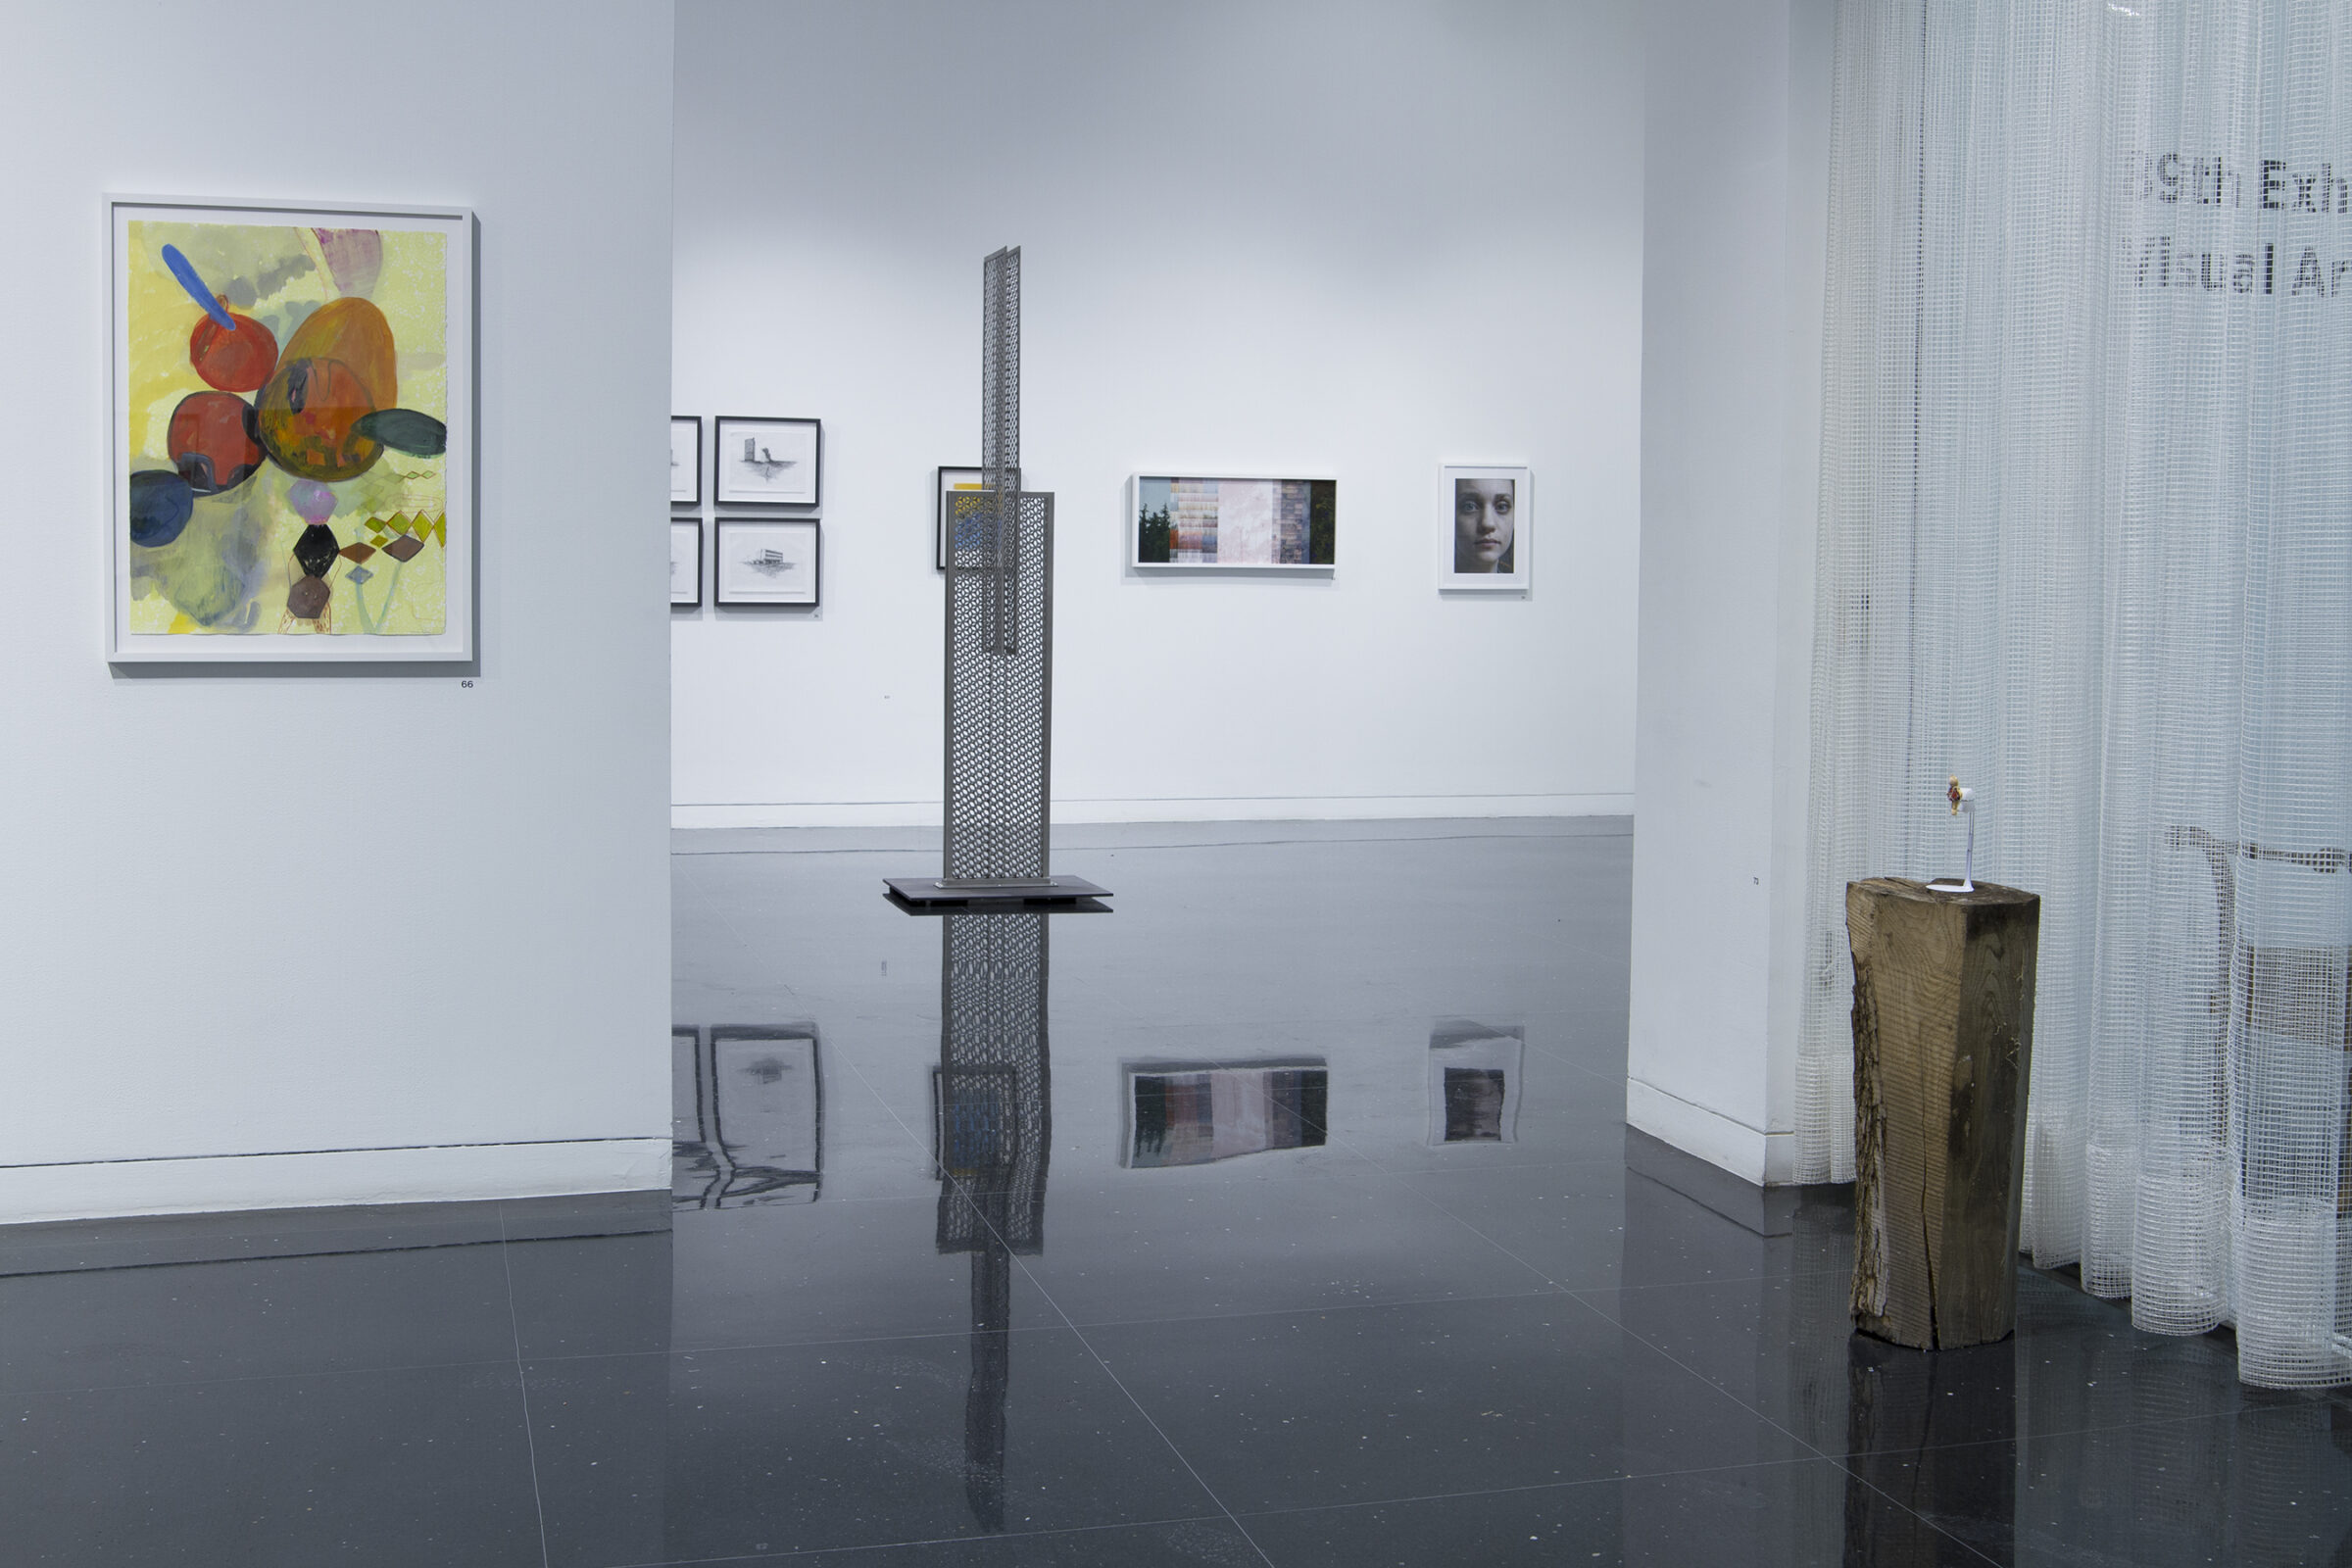 A white gallery space where a very small sculpture stands on a large wooden log to the viewer's right, across from which hangs a colorful, framed abstract painting on a freestanding wall. A large metal sculpture perforated by a grid of holes stands in the distant gallery among other framed wall works.